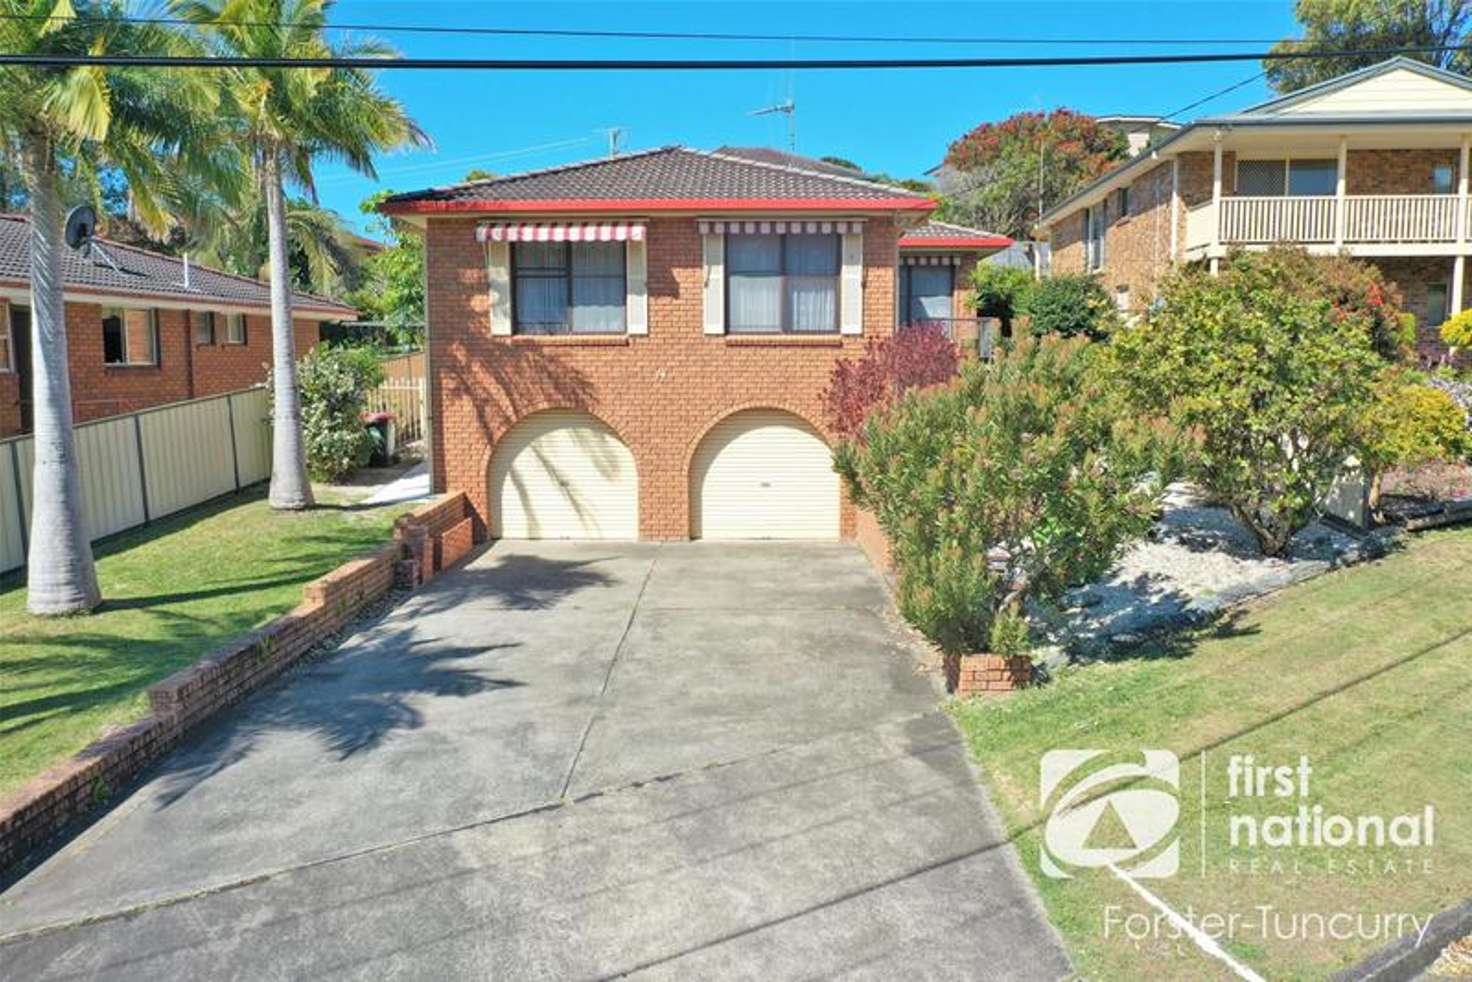 Main view of Homely house listing, 74 Daphne Street, Forster NSW 2428